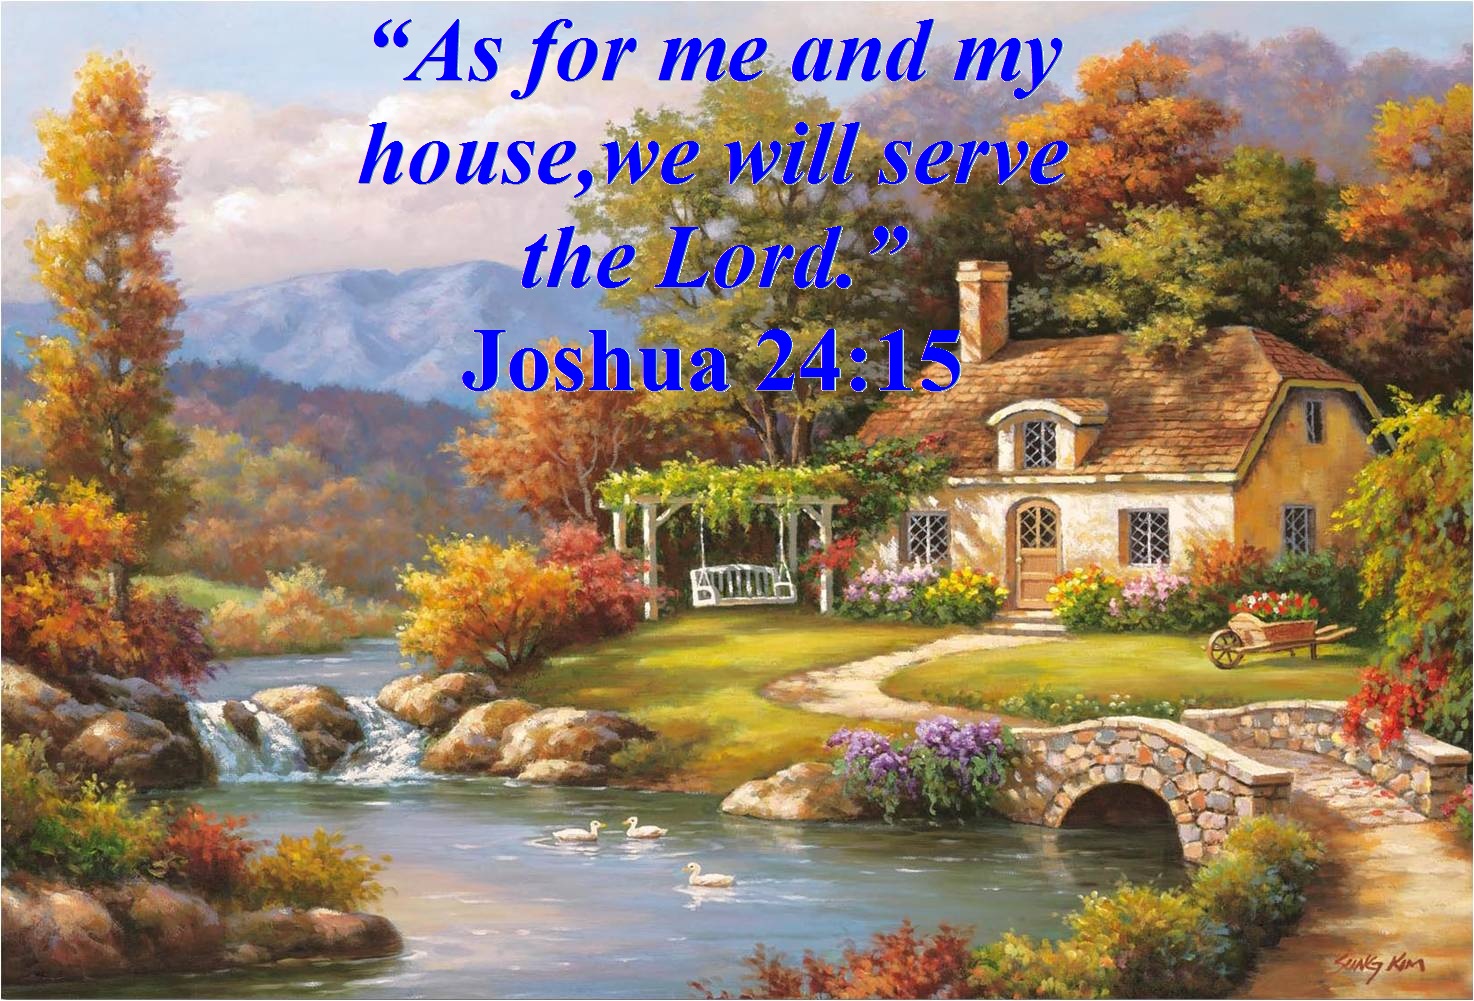 as-for-me-and-my-house-we-will-serve-the-lord-joshua-24-15